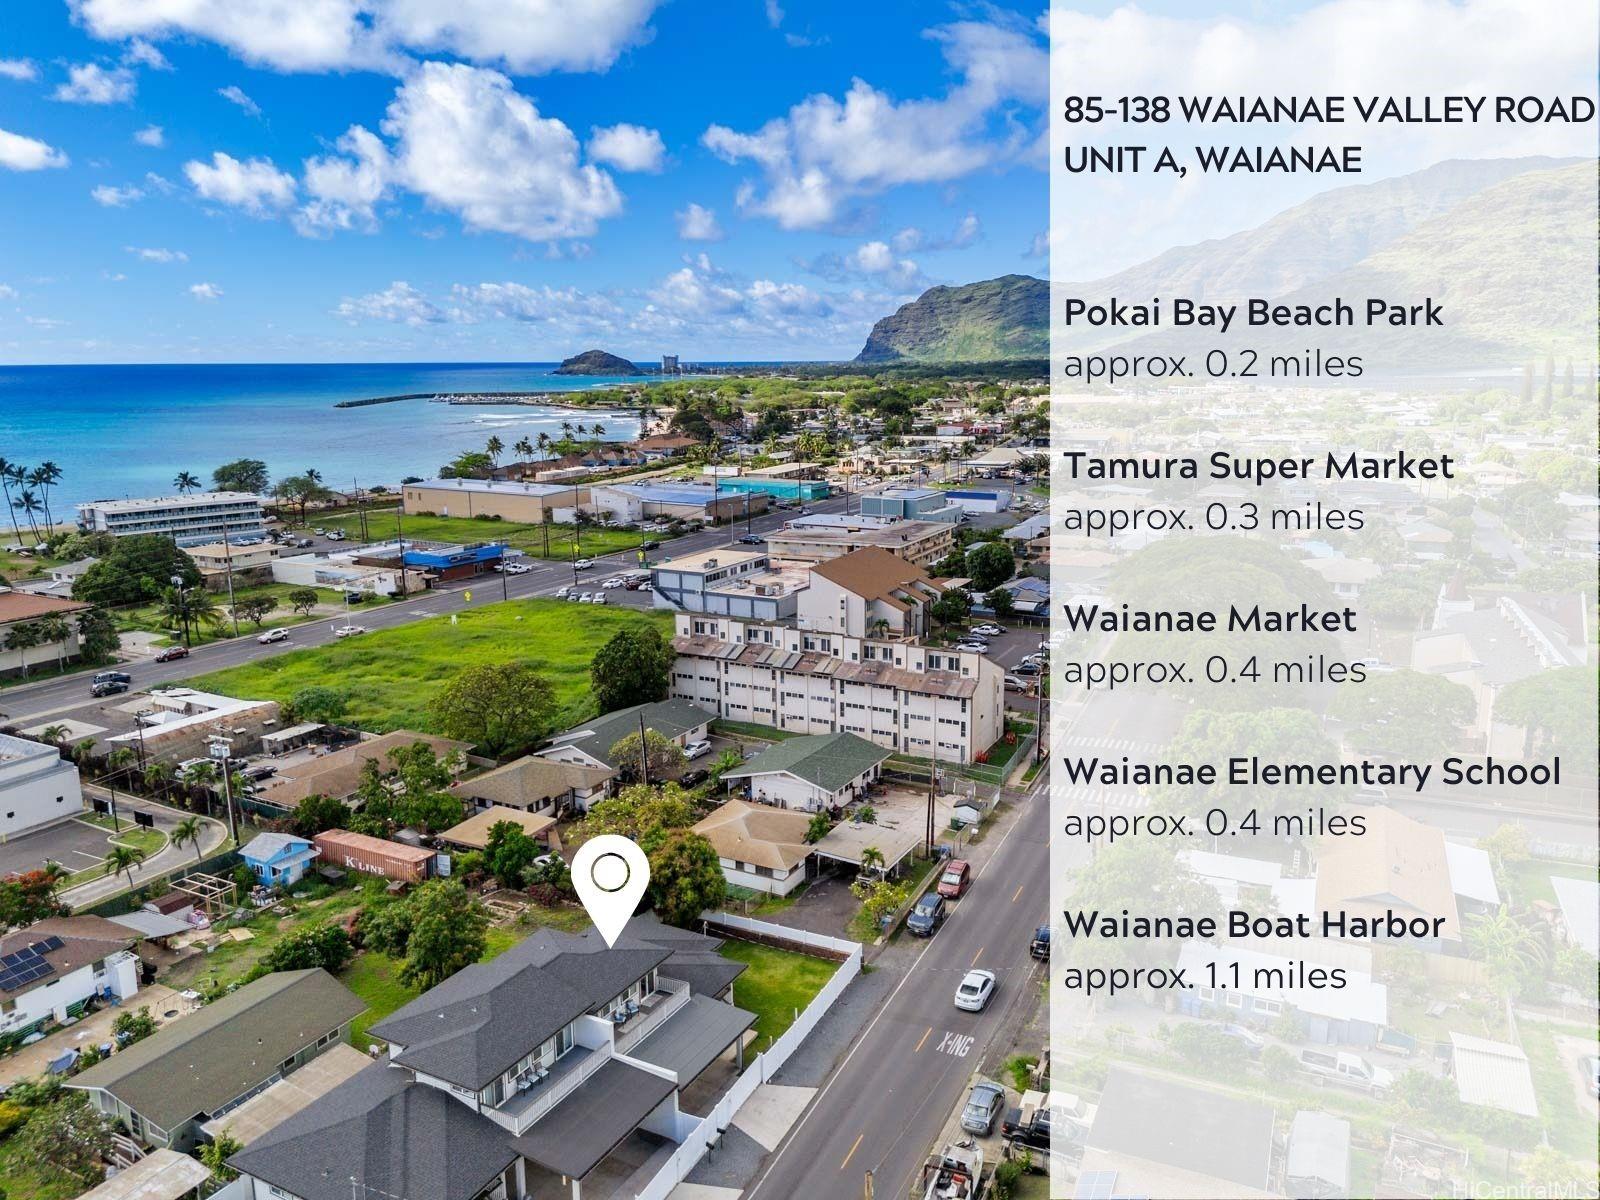 85-138 Waianae Valley Road  Unit A